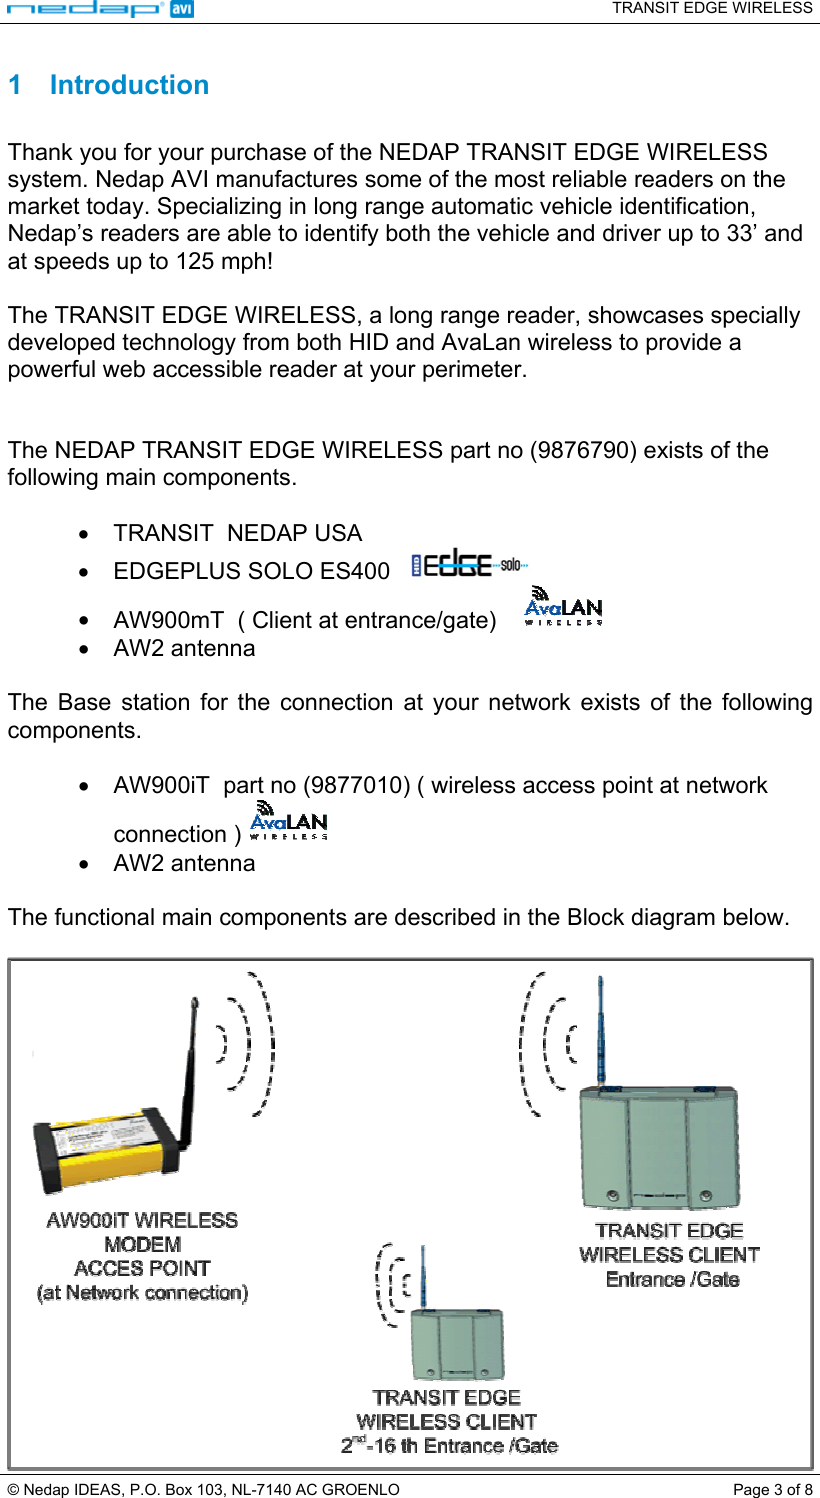   TRANSIT EDGE WIRELESS  © Nedap IDEAS, P.O. Box 103, NL-7140 AC GROENLO  Page 3 of 8 1 Introduction  Thank you for your purchase of the NEDAP TRANSIT EDGE WIRELESS system. Nedap AVI manufactures some of the most reliable readers on the market today. Specializing in long range automatic vehicle identification, Nedap’s readers are able to identify both the vehicle and driver up to 33’ and at speeds up to 125 mph!  The TRANSIT EDGE WIRELESS, a long range reader, showcases specially developed technology from both HID and AvaLan wireless to provide a powerful web accessible reader at your perimeter.    The NEDAP TRANSIT EDGE WIRELESS part no (9876790) exists of the following main components.  •  TRANSIT  NEDAP USA    •  EDGEPLUS SOLO ES400     •  AW900mT  ( Client at entrance/gate)      •  AW2 antenna  The Base station for the connection at your network exists of the following components.  •  AW900iT  part no (9877010) ( wireless access point at network connection )   •  AW2 antenna  The functional main components are described in the Block diagram below.   